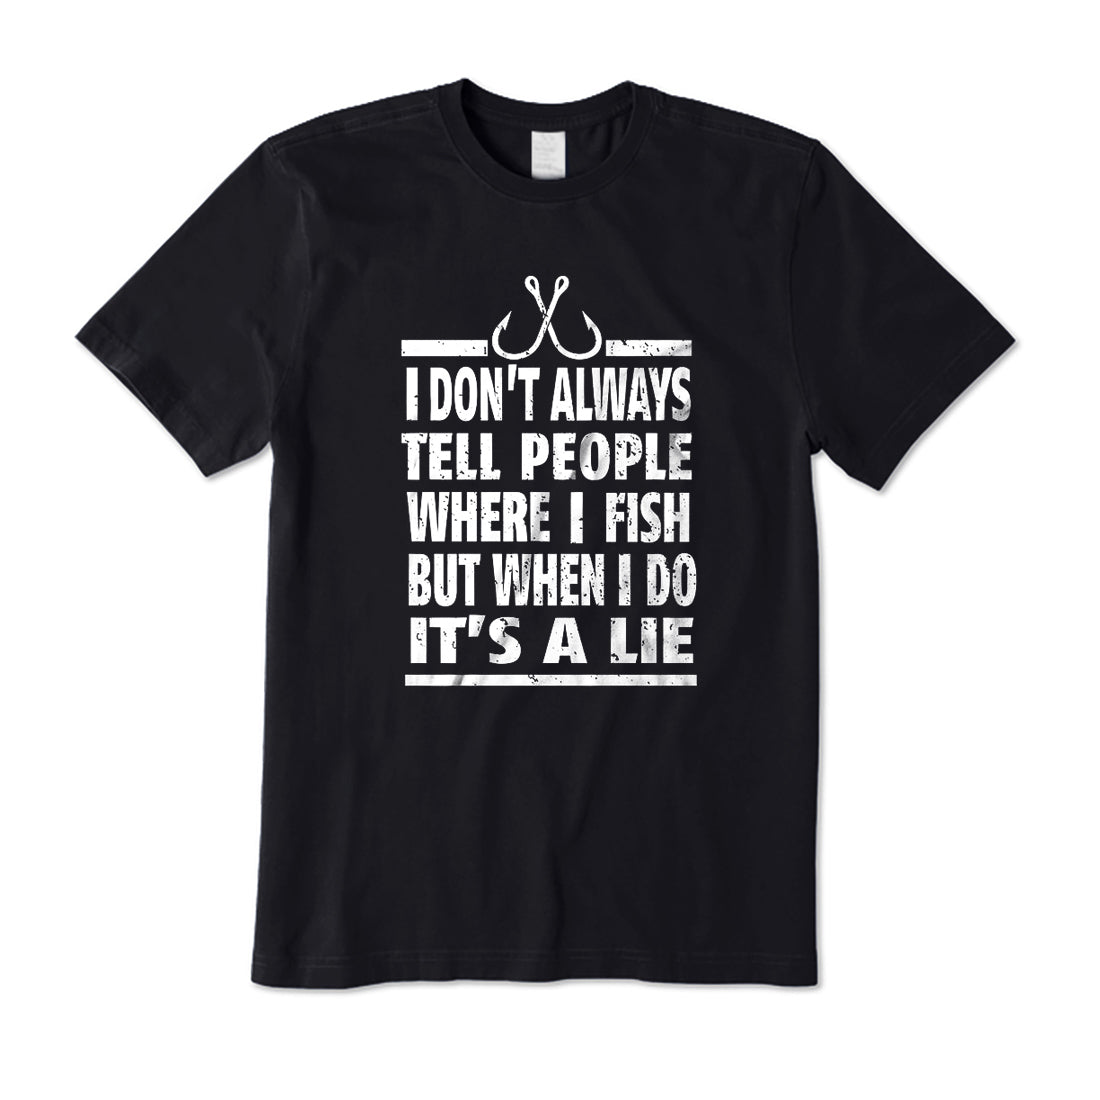 NOT TELL PEOPLE WHERE I FISH T-Shirt